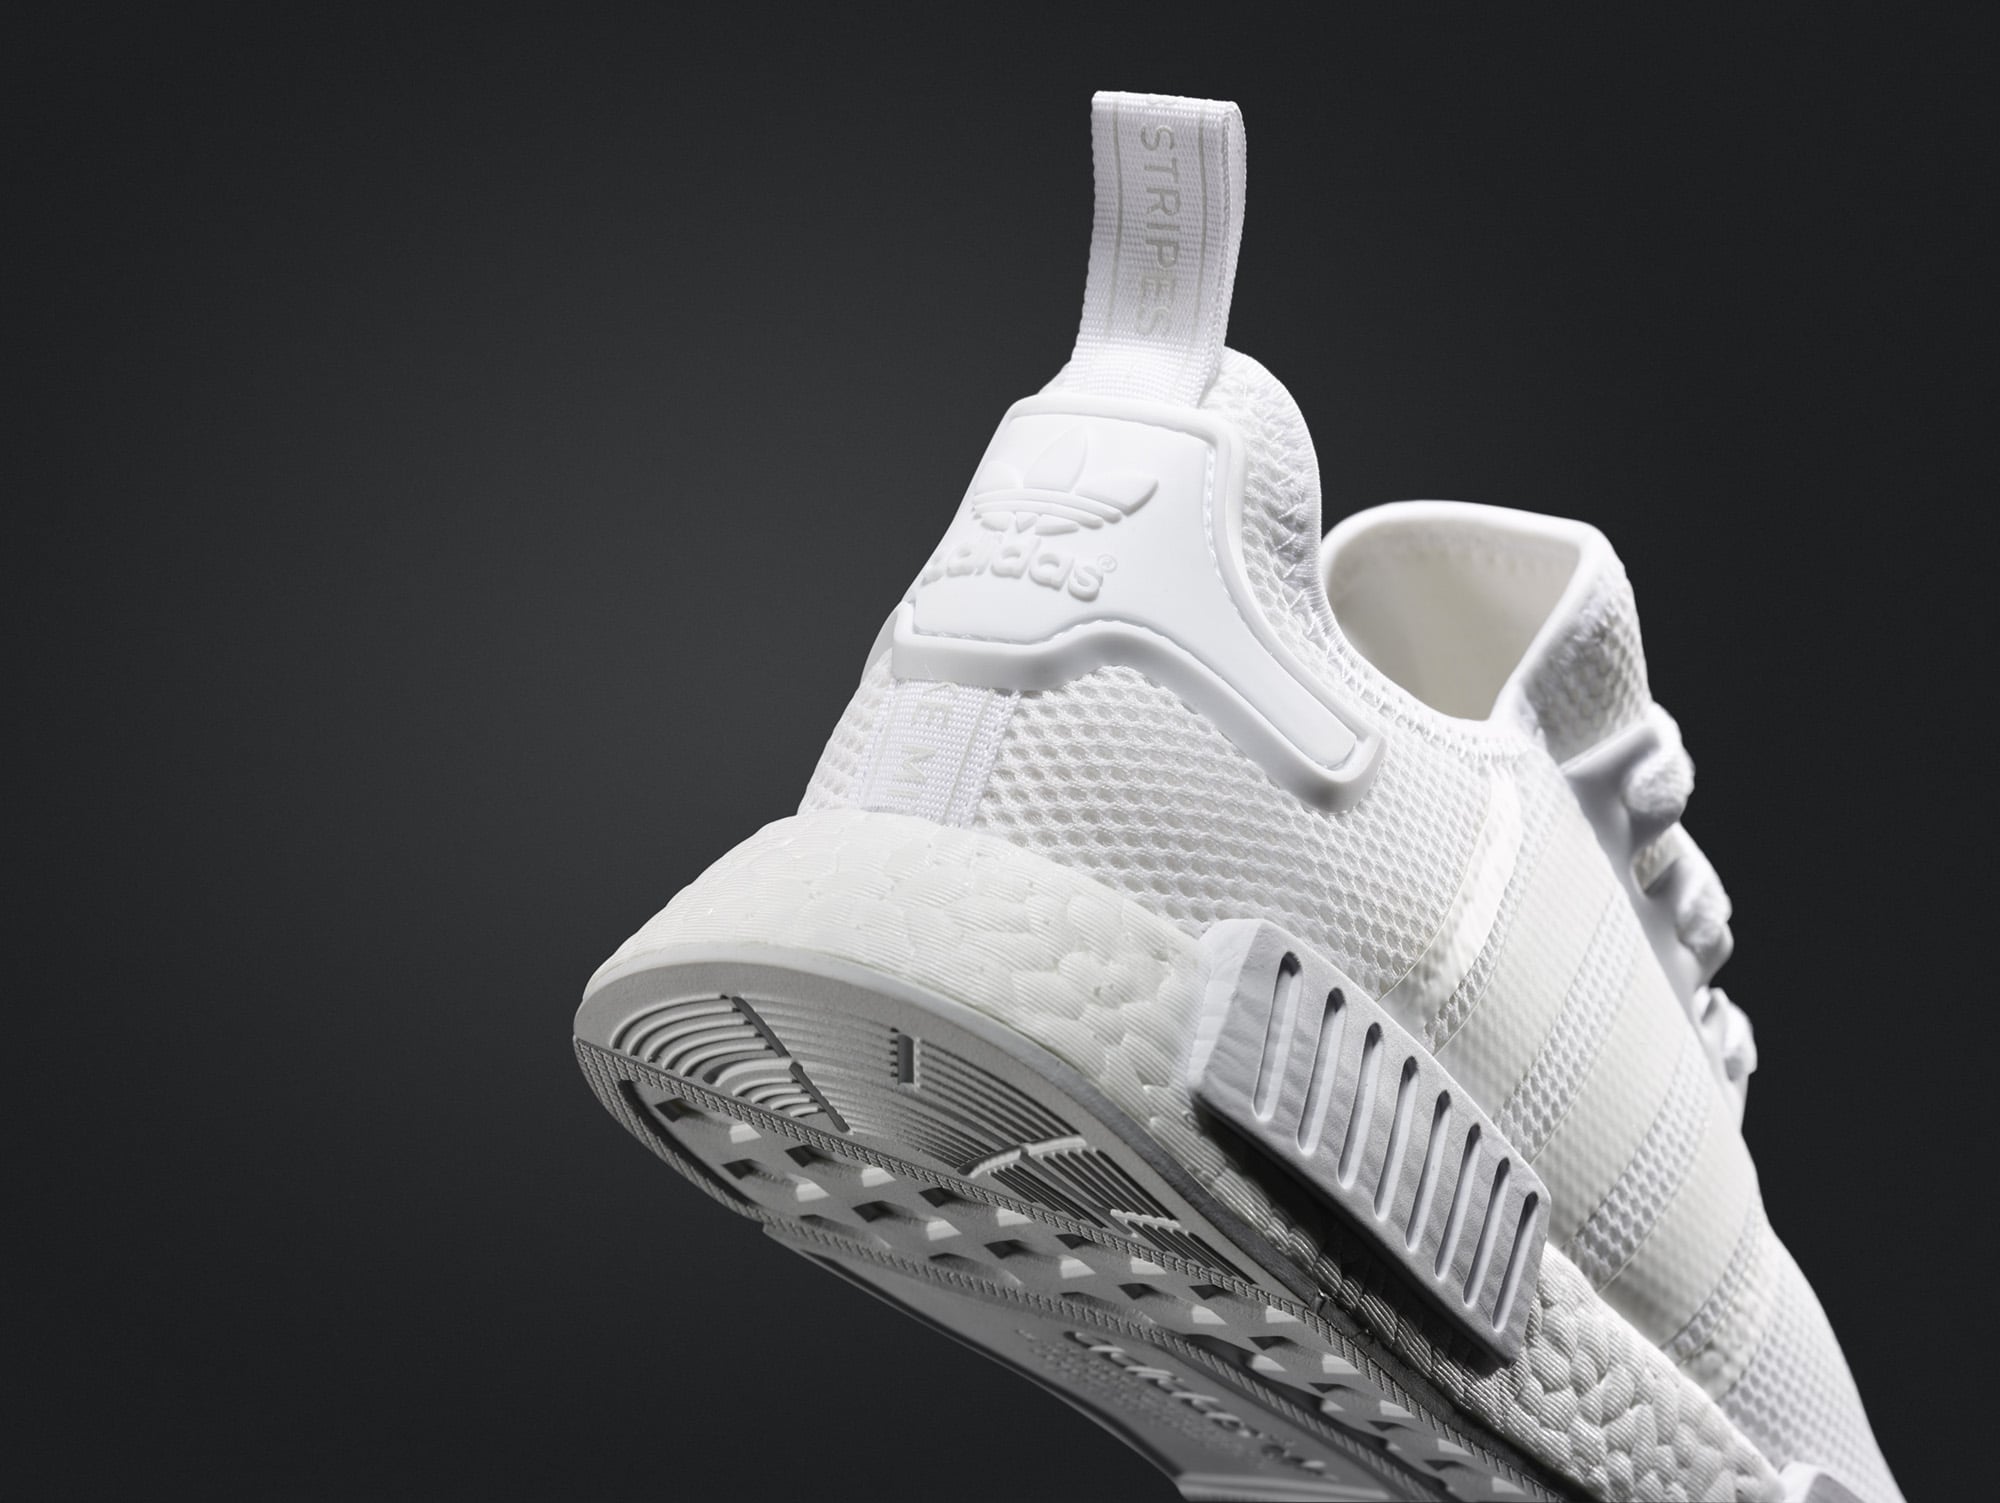 adidas all white nmd